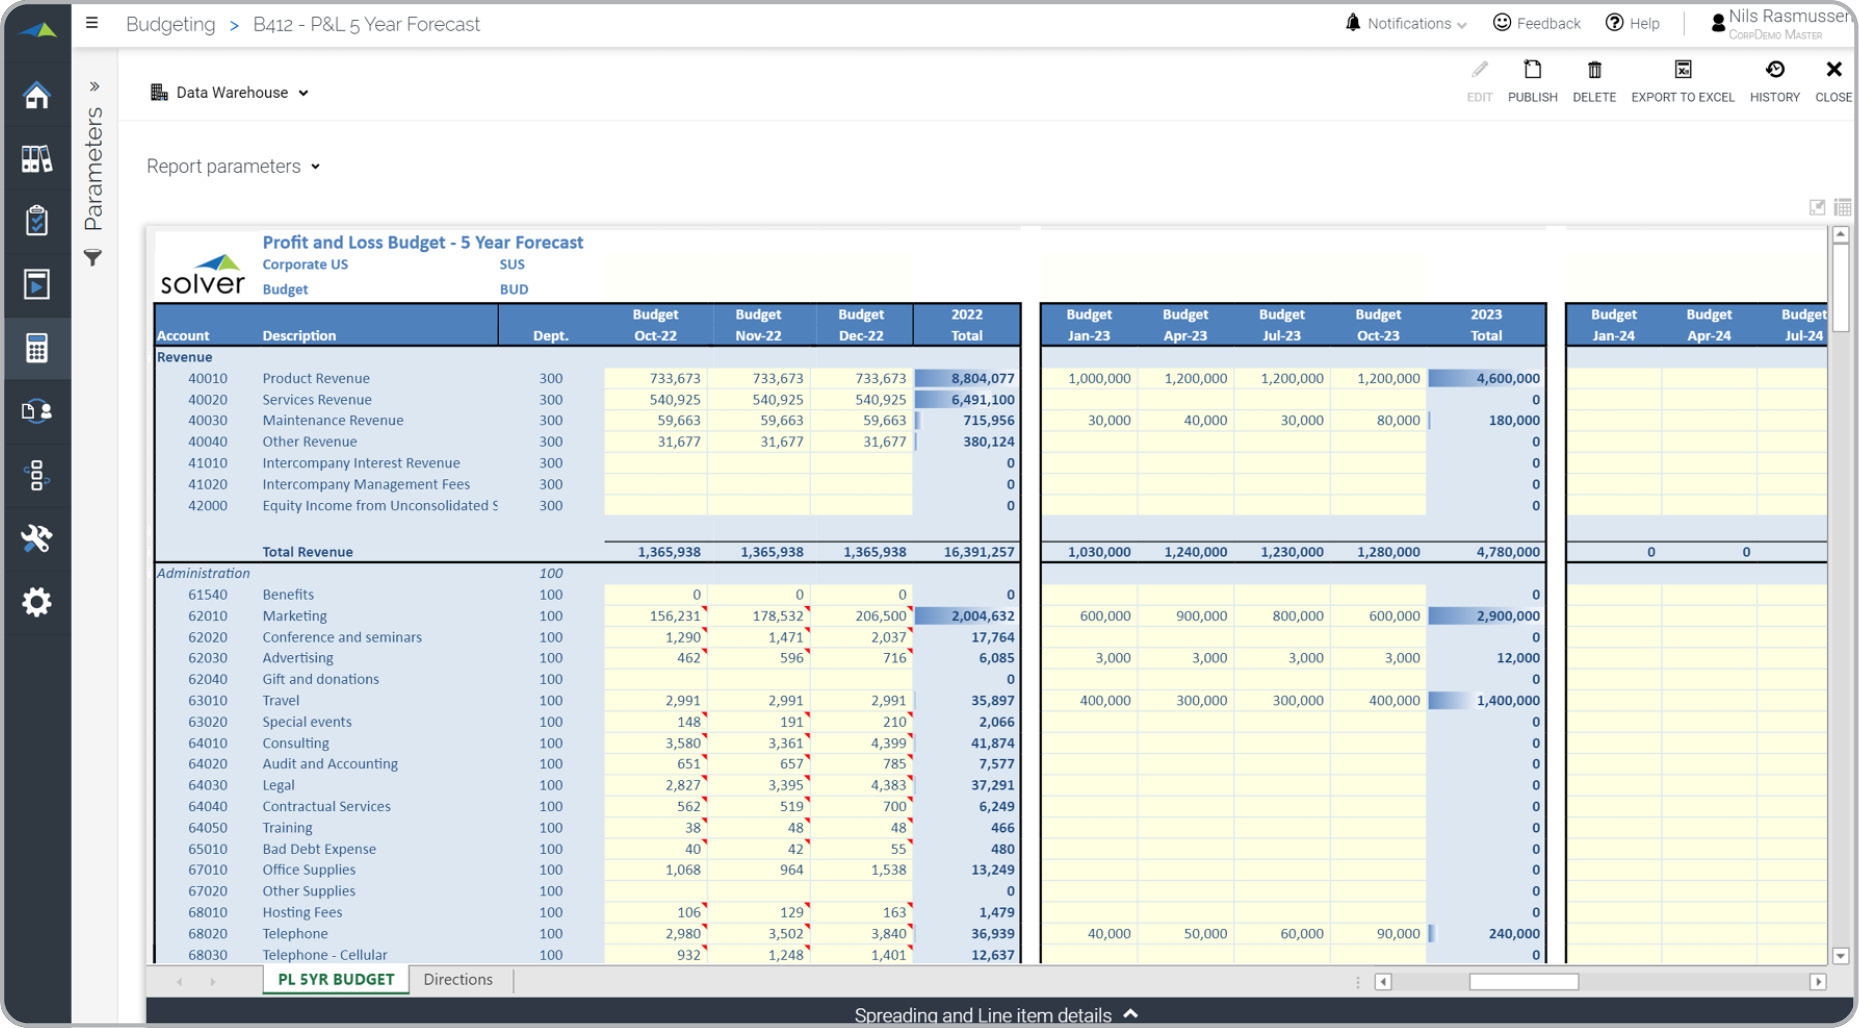 Multi-Year Forecast Input Template for Dynamics 365 Business Central